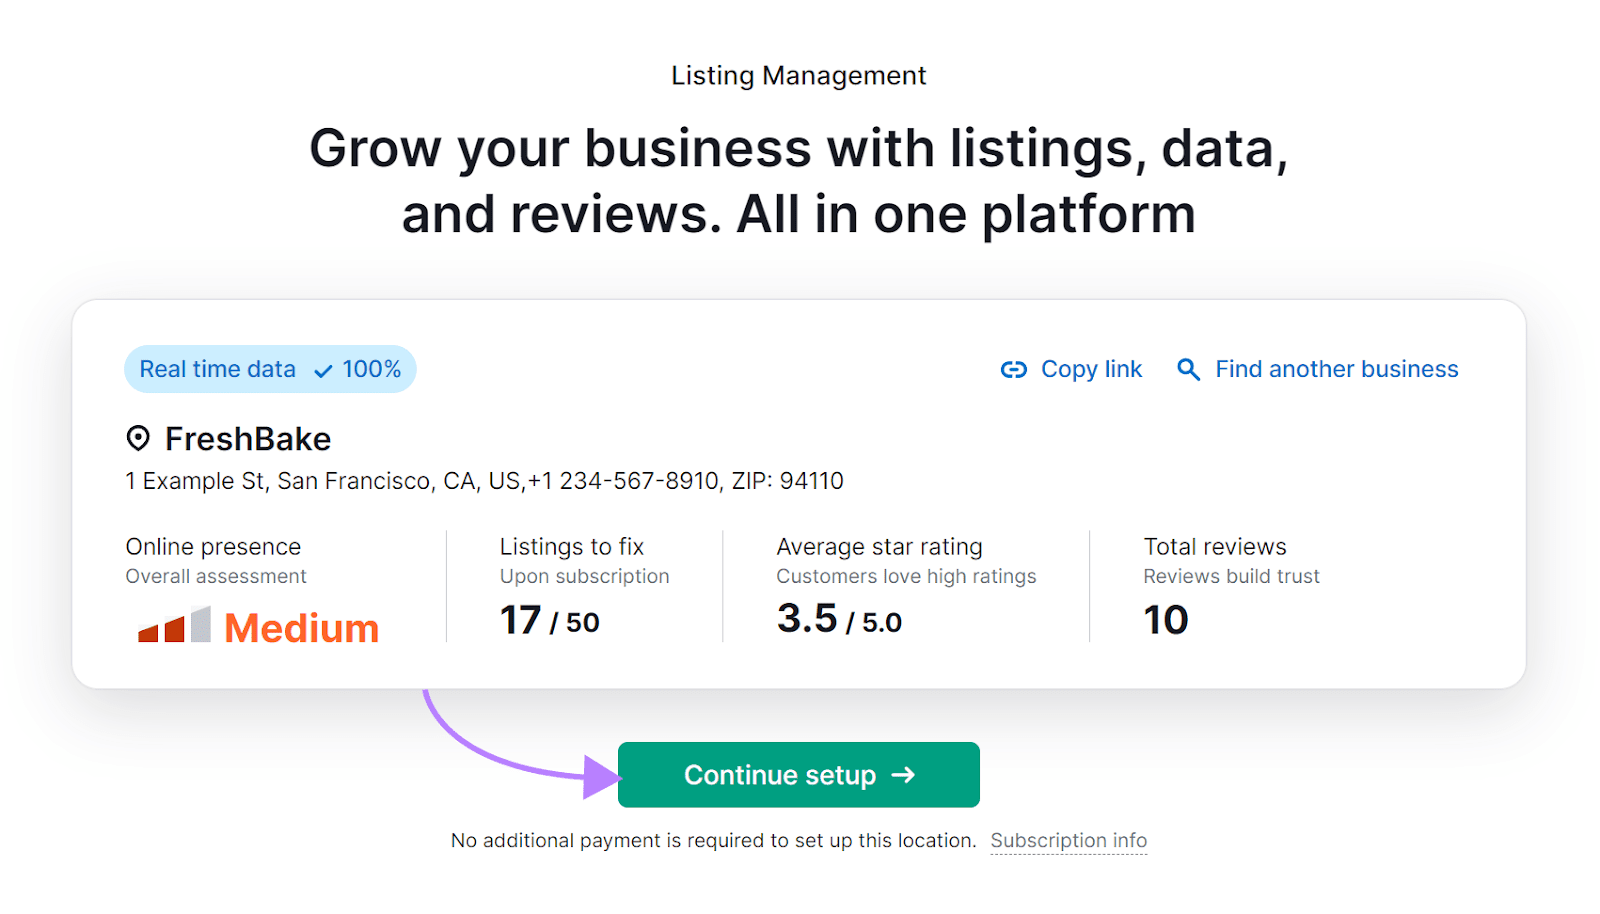 An overview of FreshBake's online presence in Listing Management tool